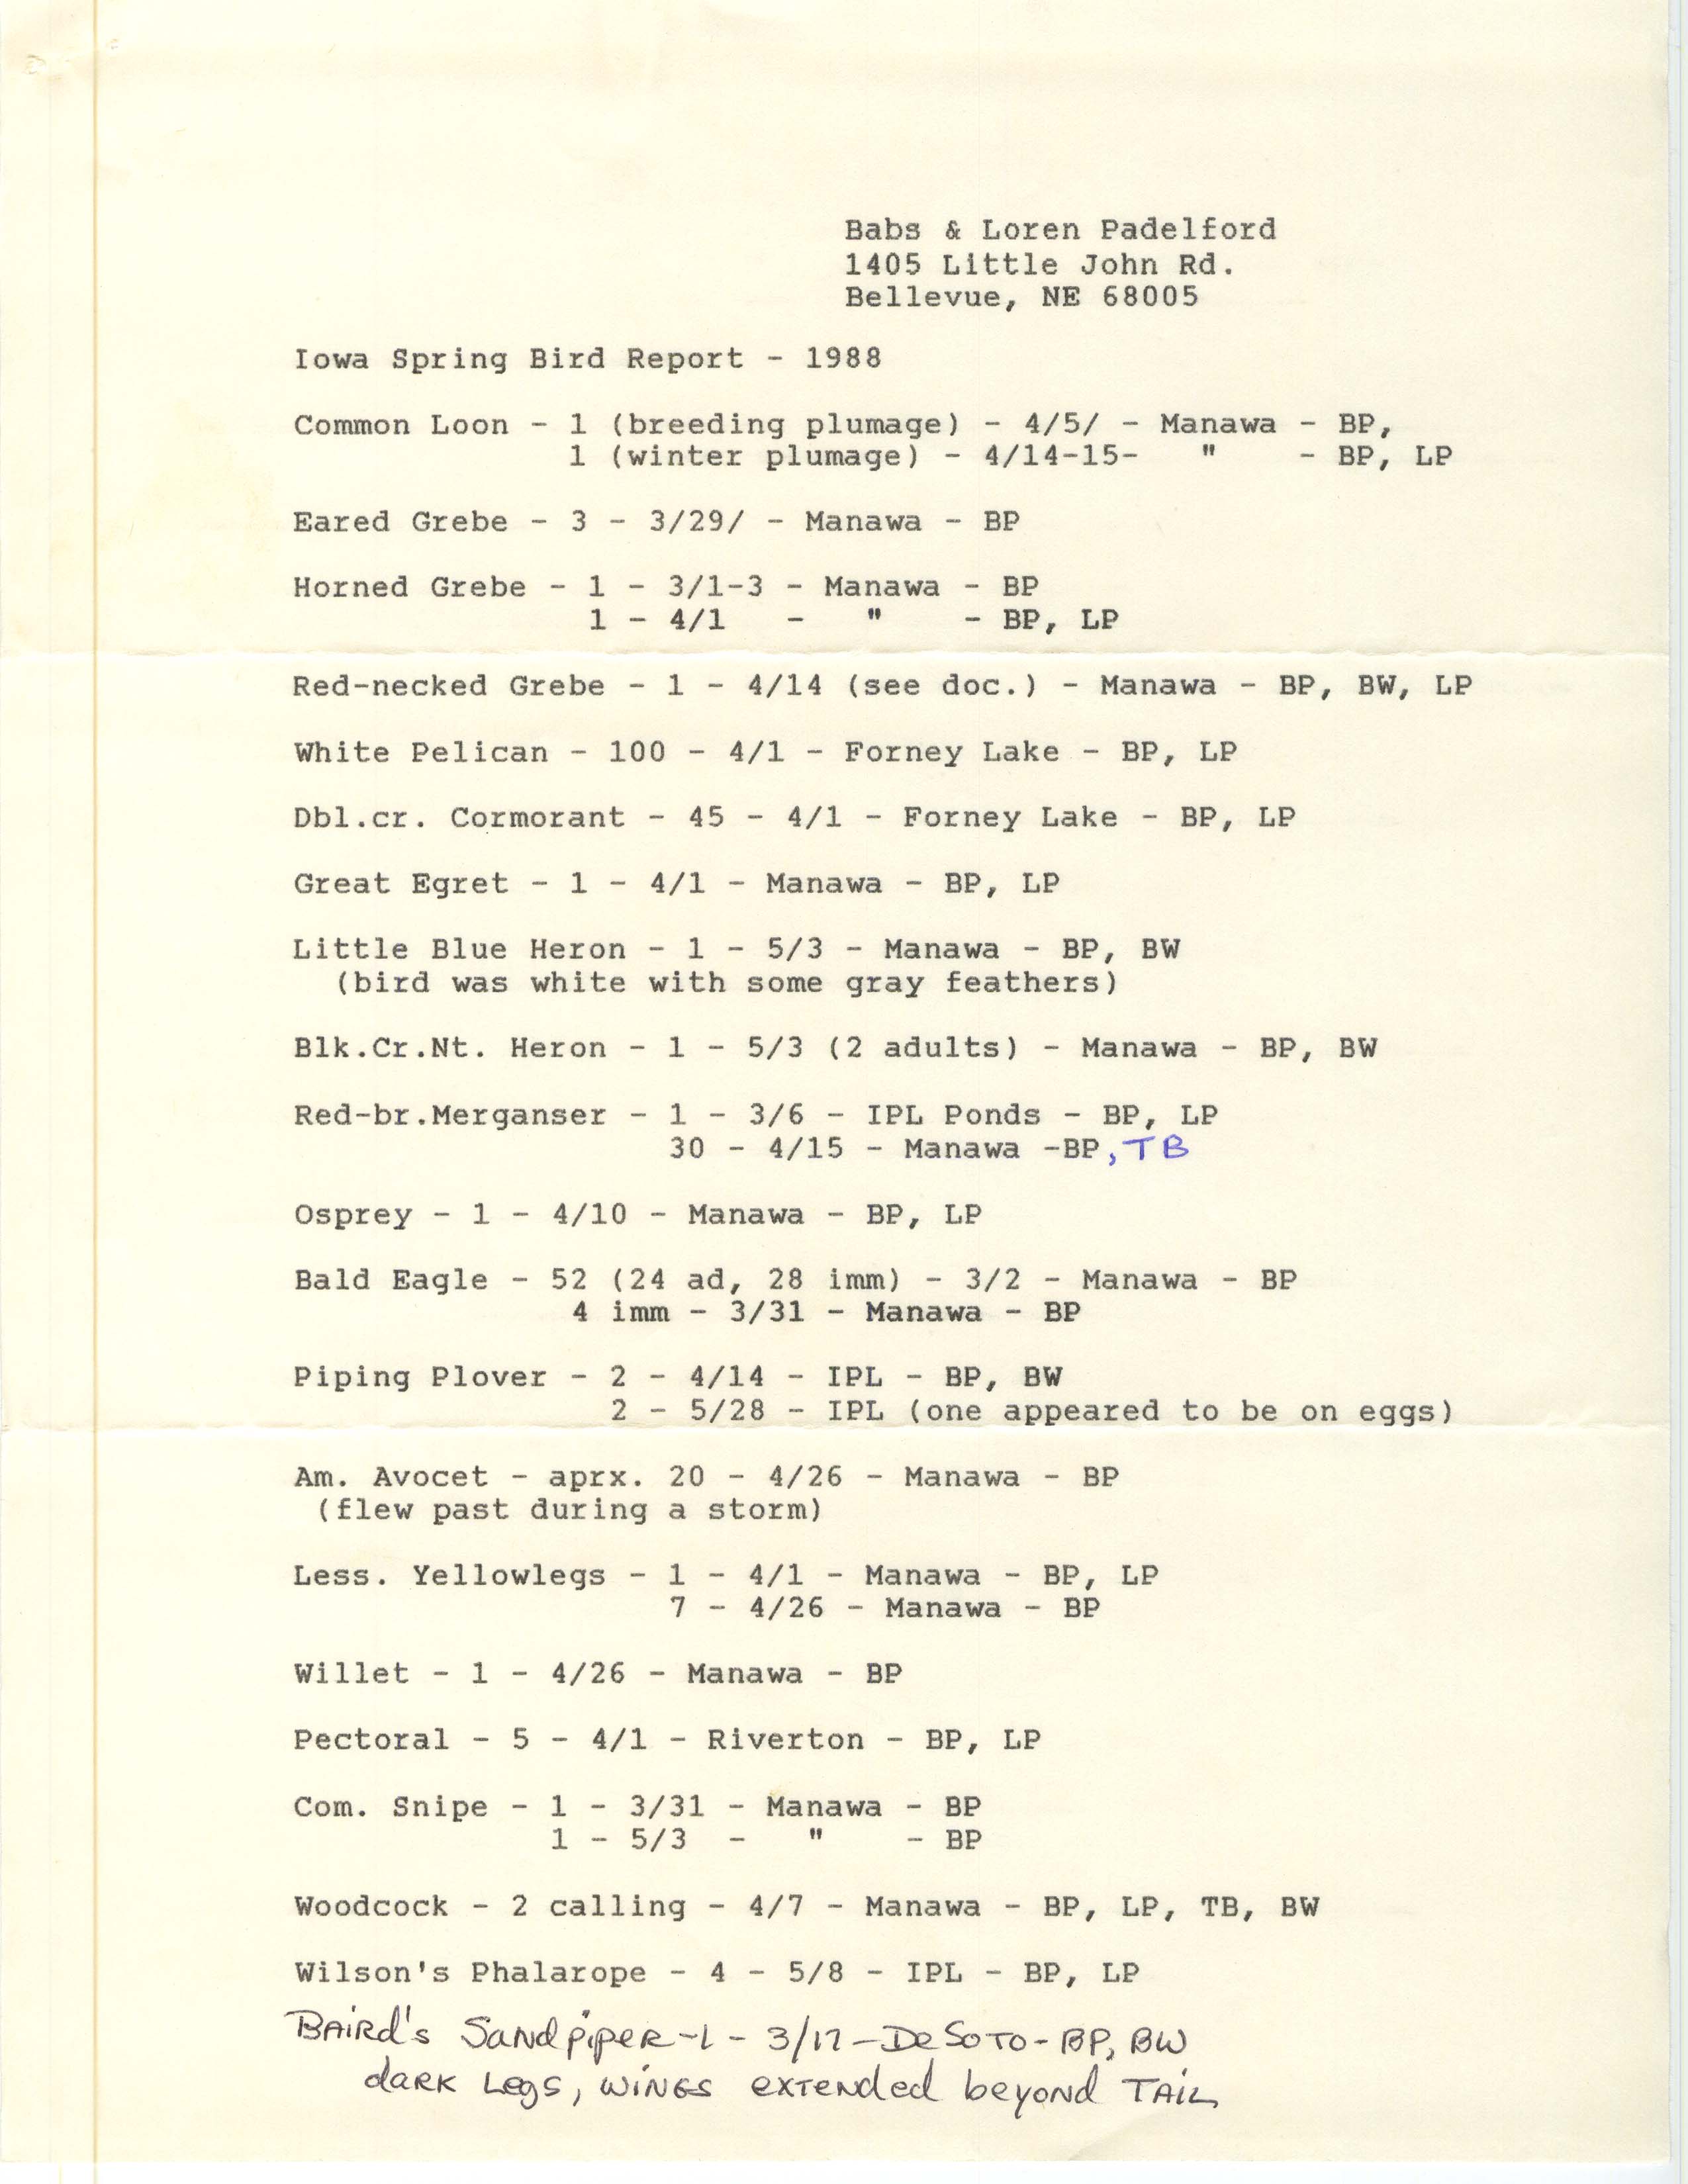 Iowa spring bird report contributed by Babs Padelford and Loren Padelford, spring 1988